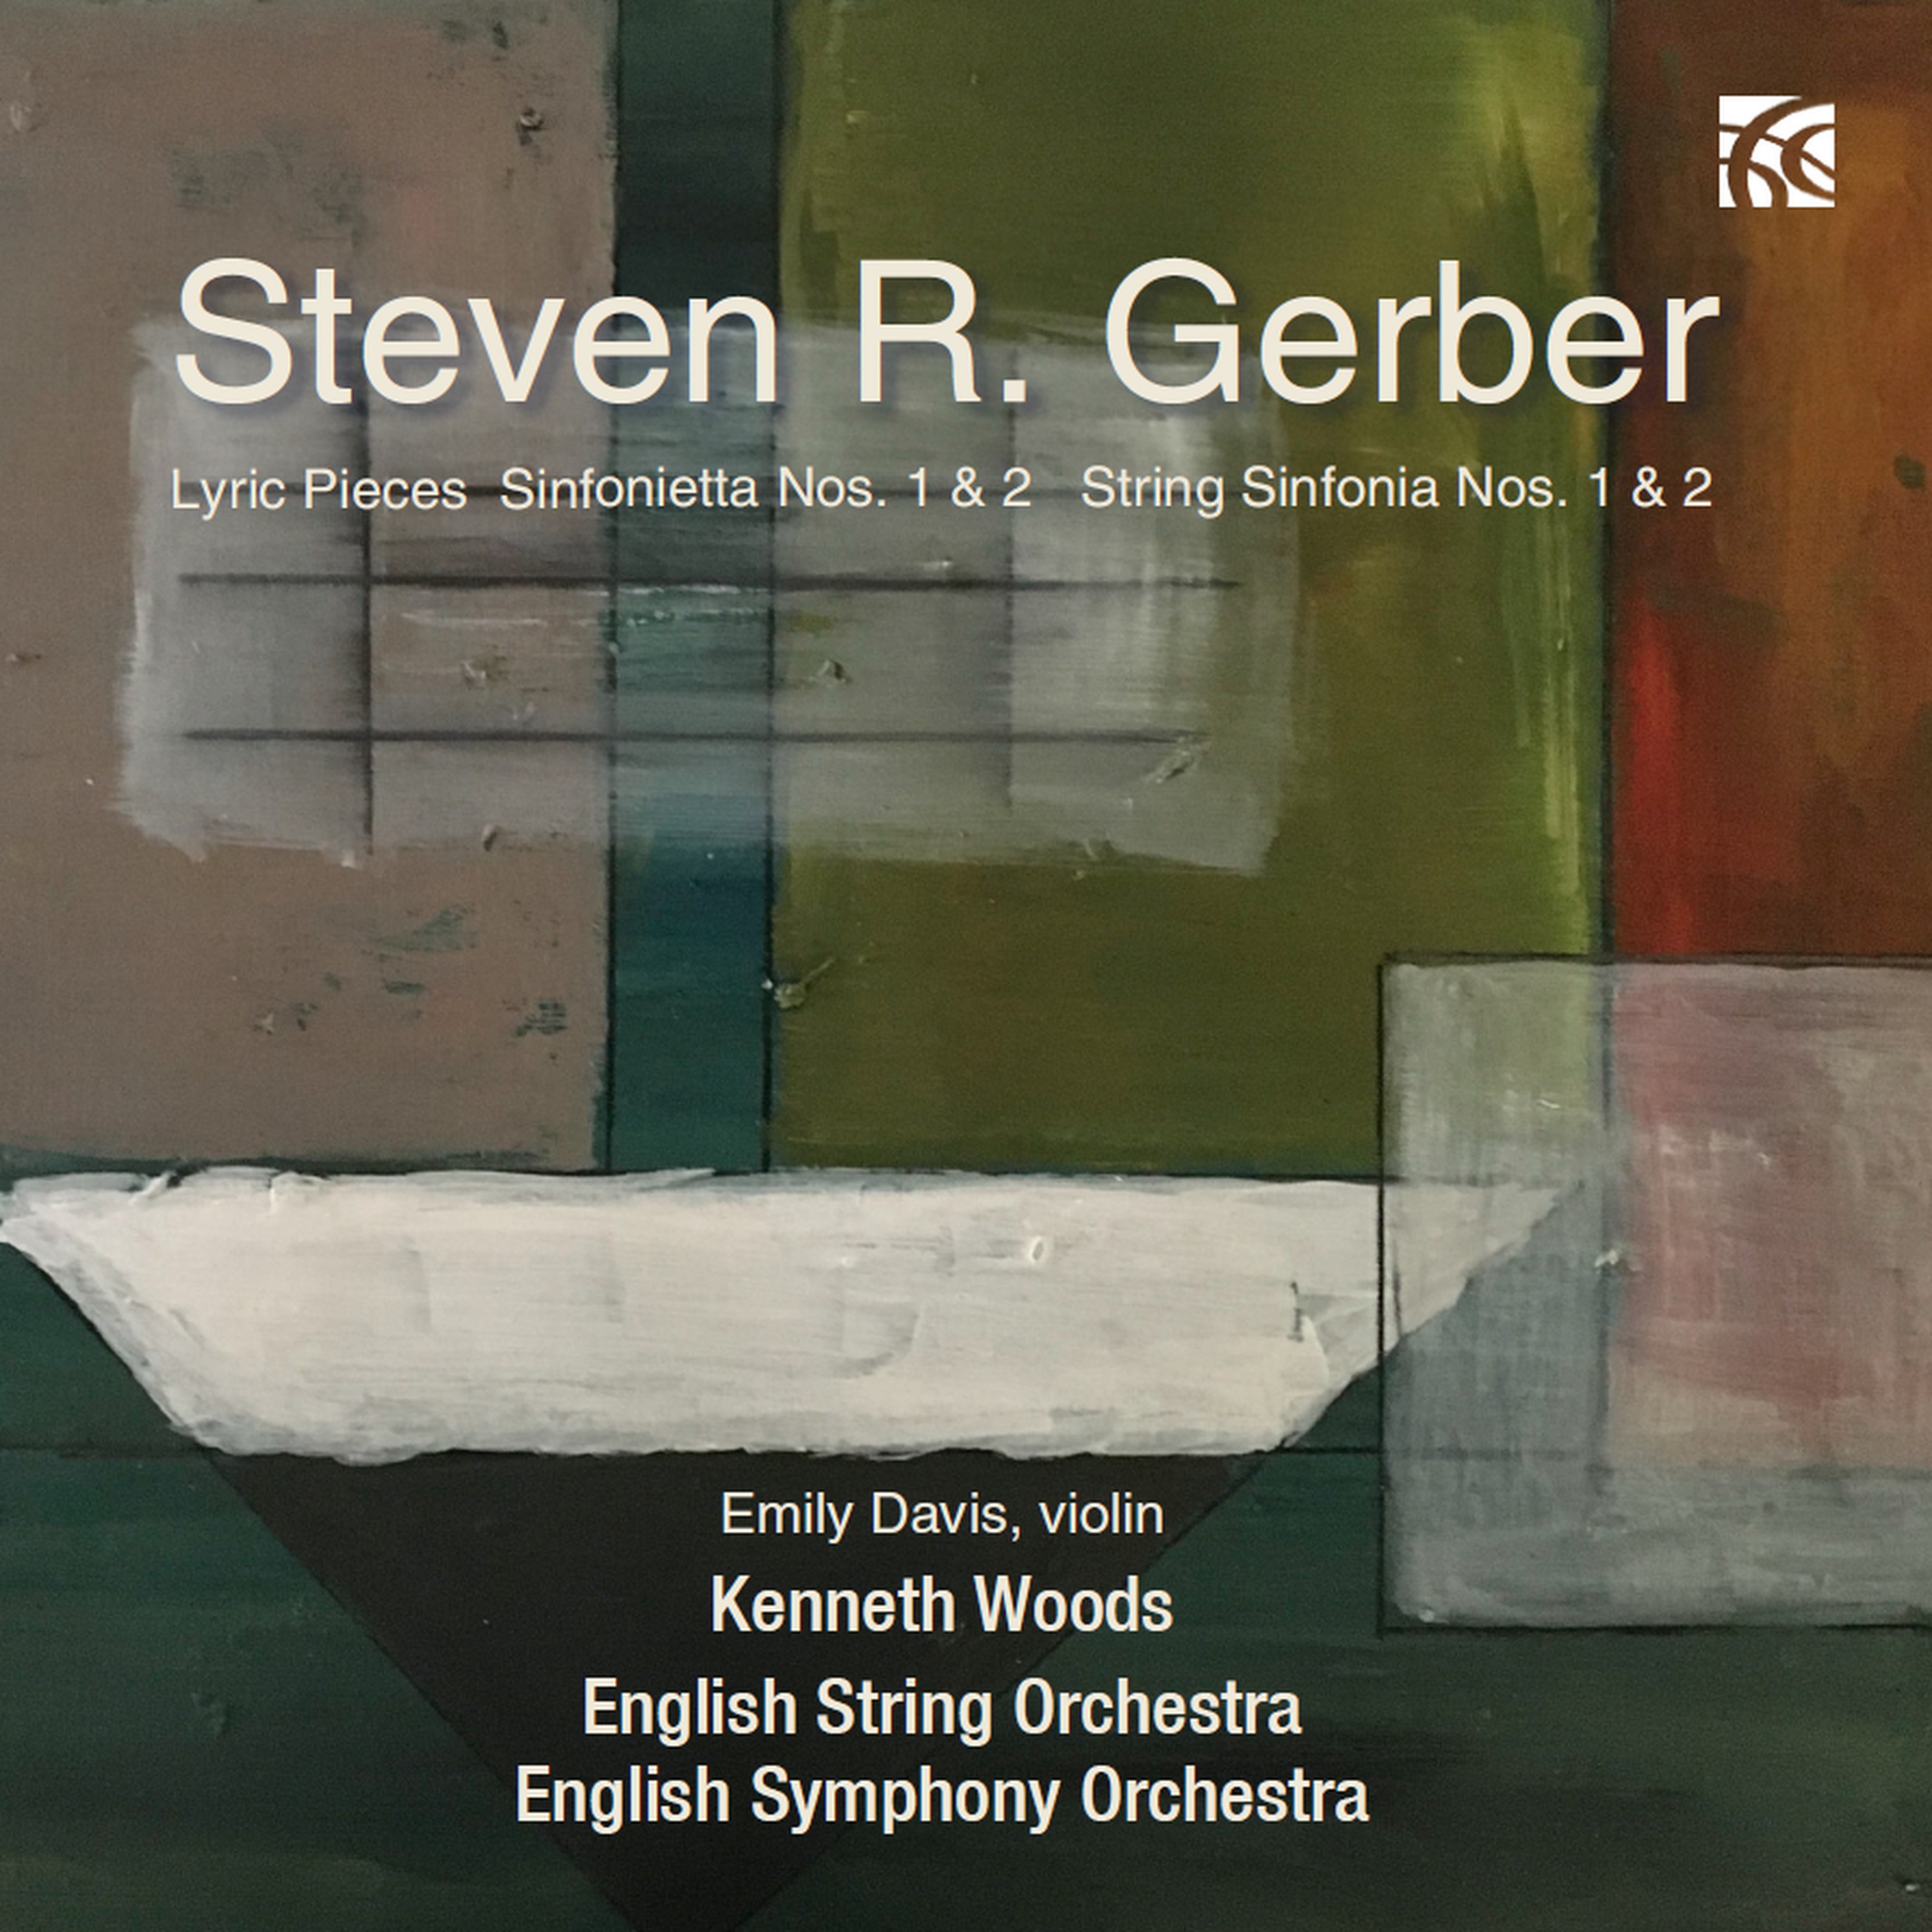 Meeting the Music of Steven R. Gerber: Conductor Kenneth Woods and Arranger Adrian Williams in Interview